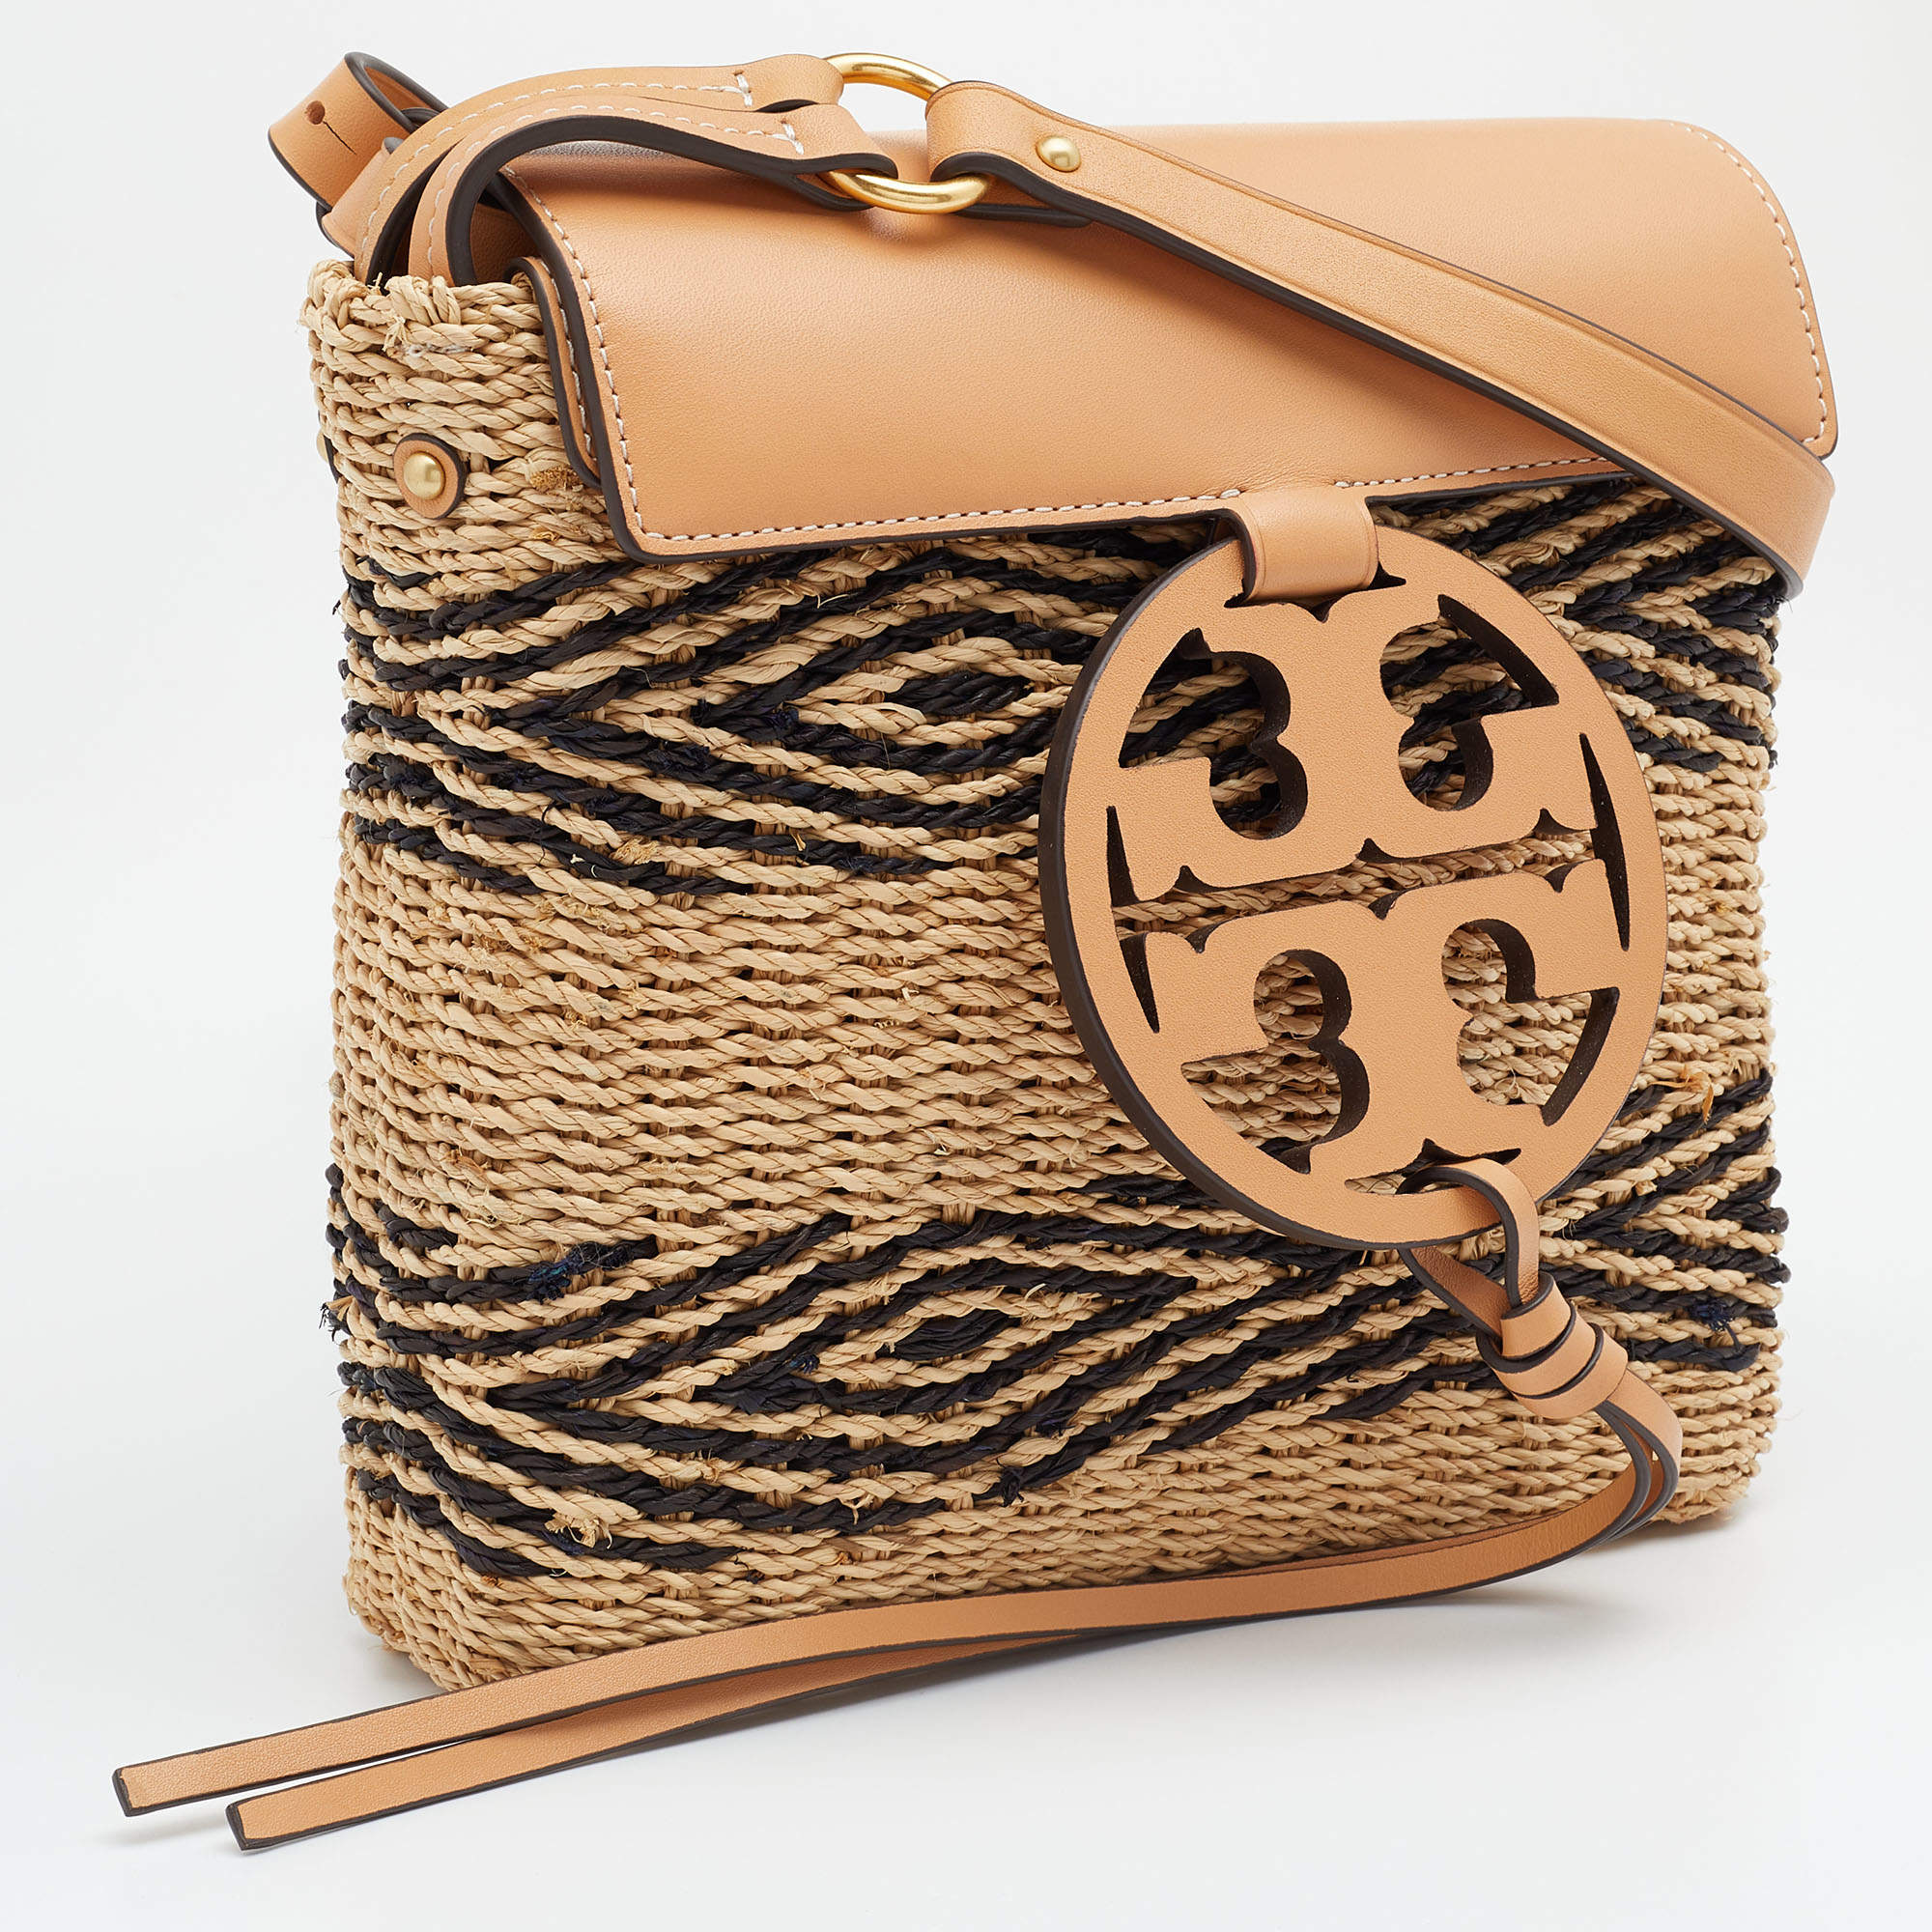 Tory Burch Brown & Black Miller Straw Stripe Tote, Best Price and Reviews